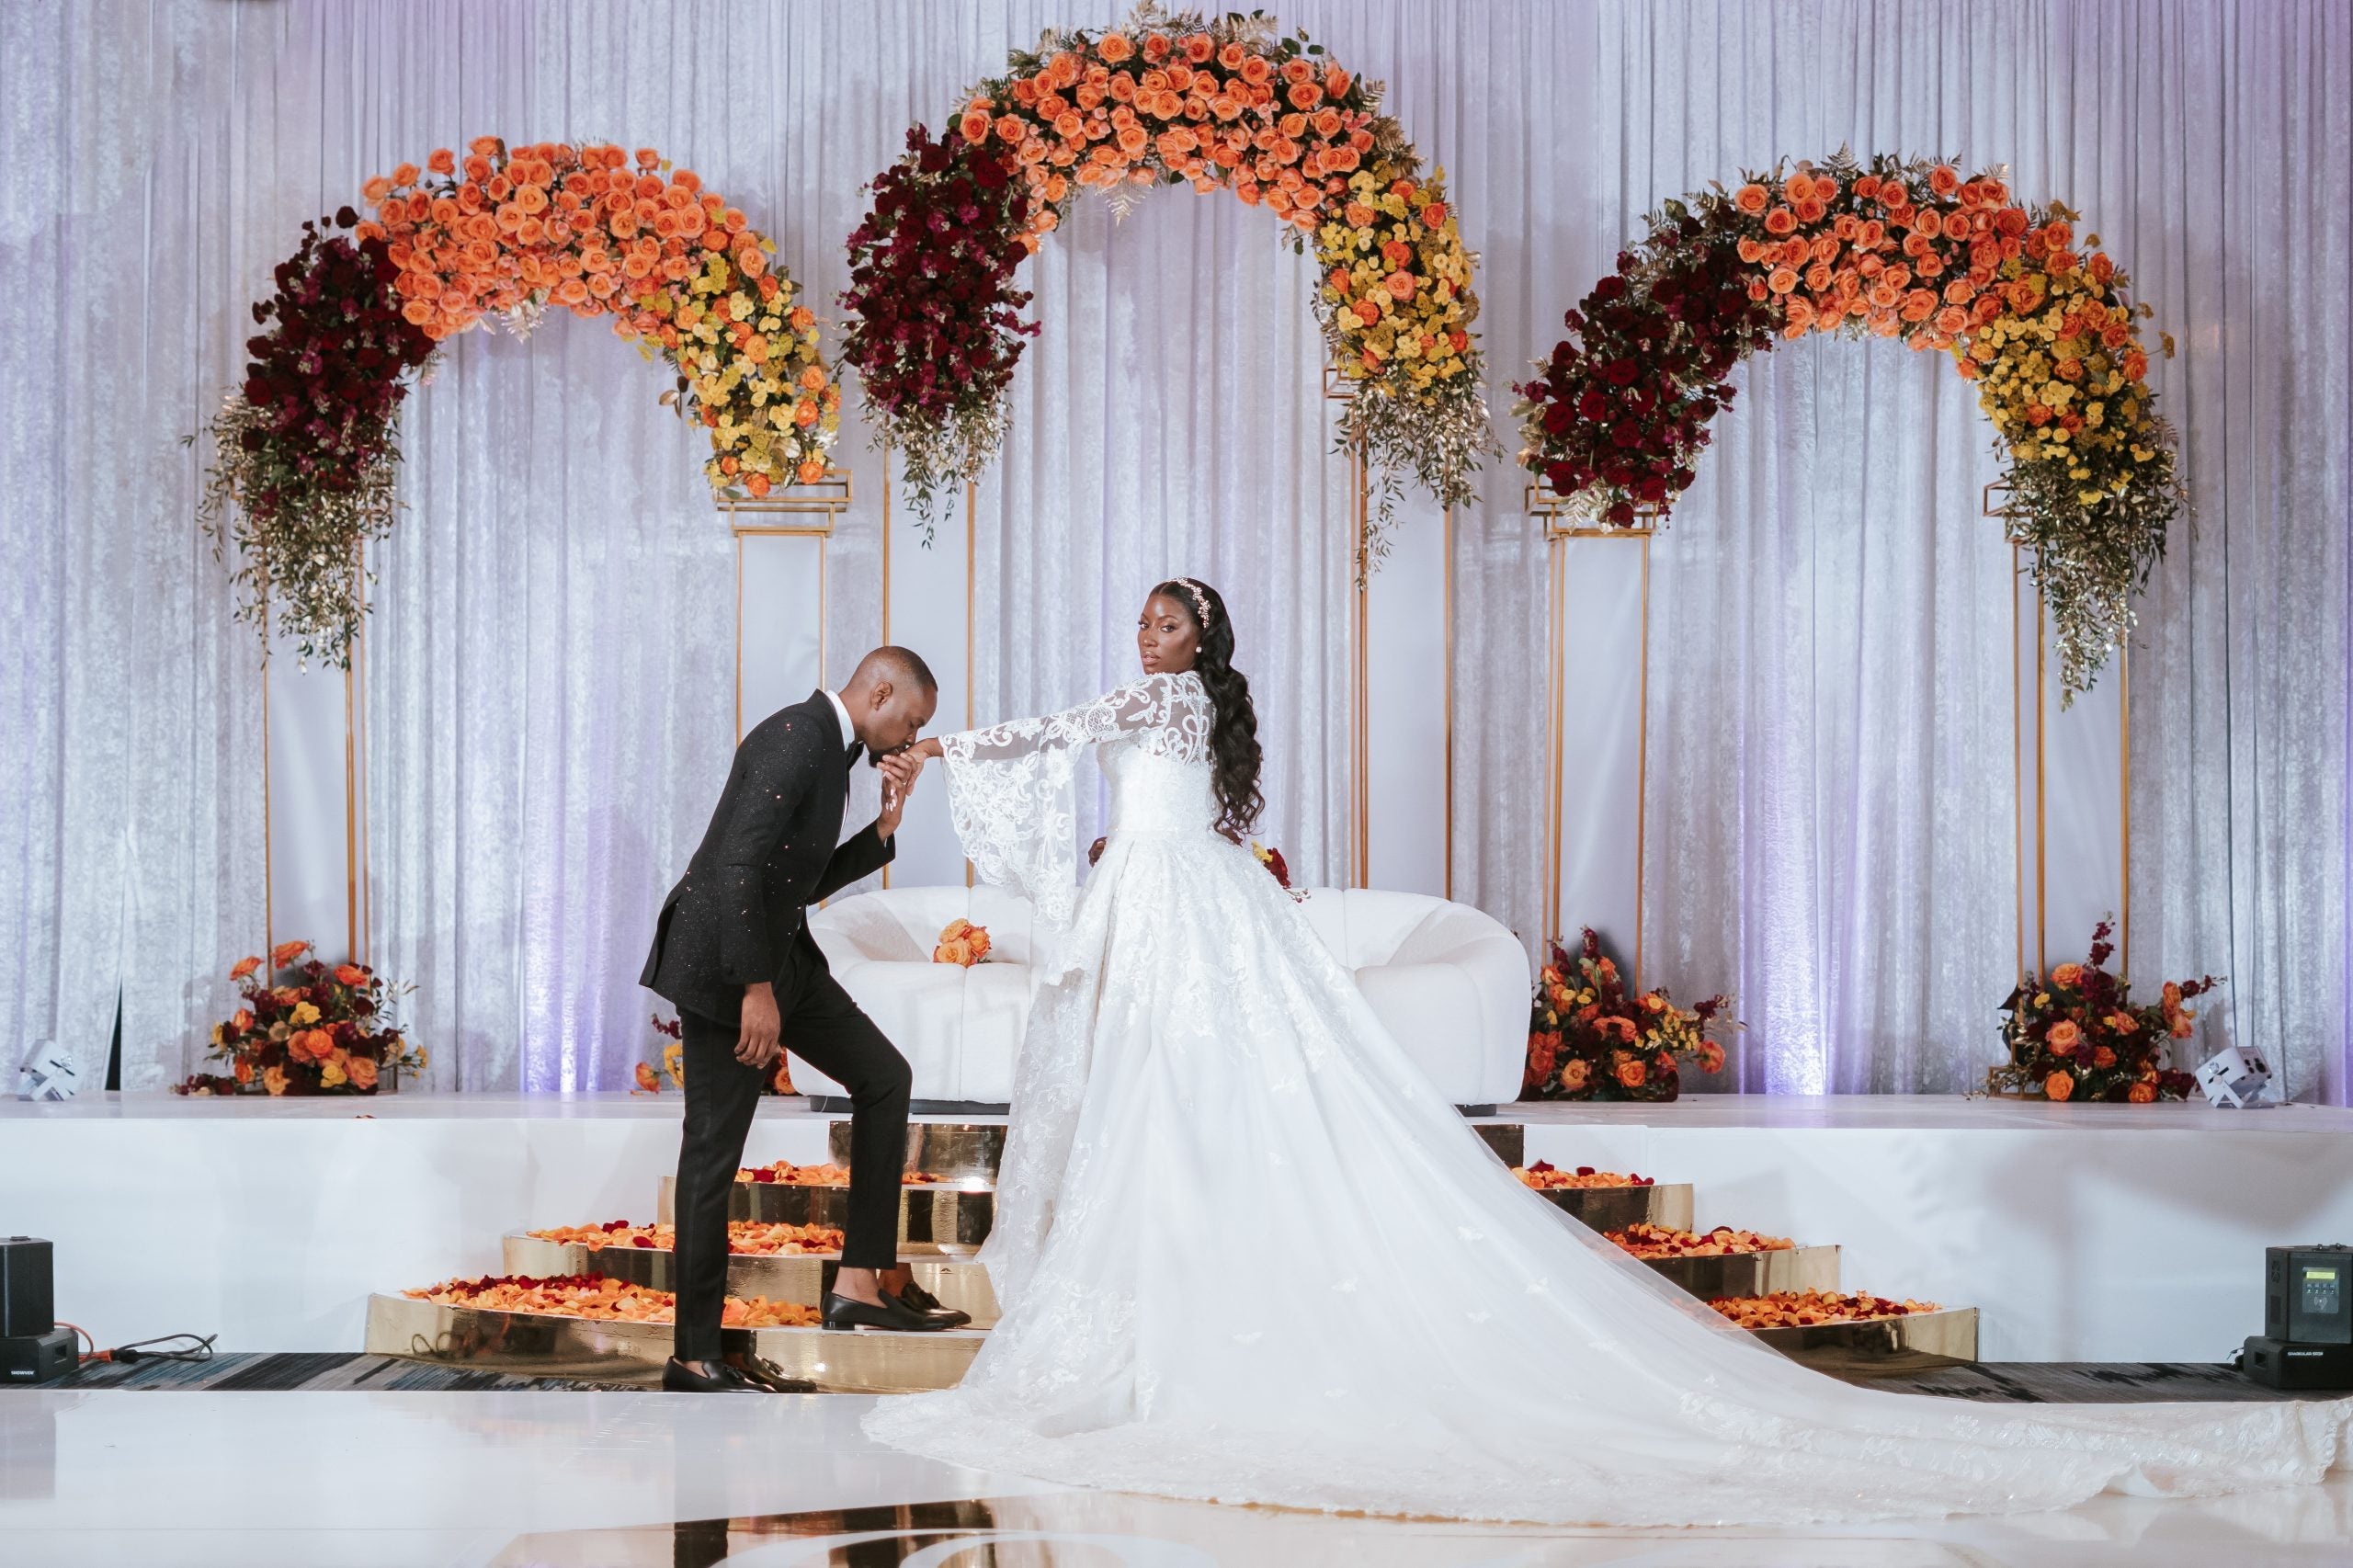 The Best Of Bridal Bliss: Our Favorite Images Of Black Love In 2023